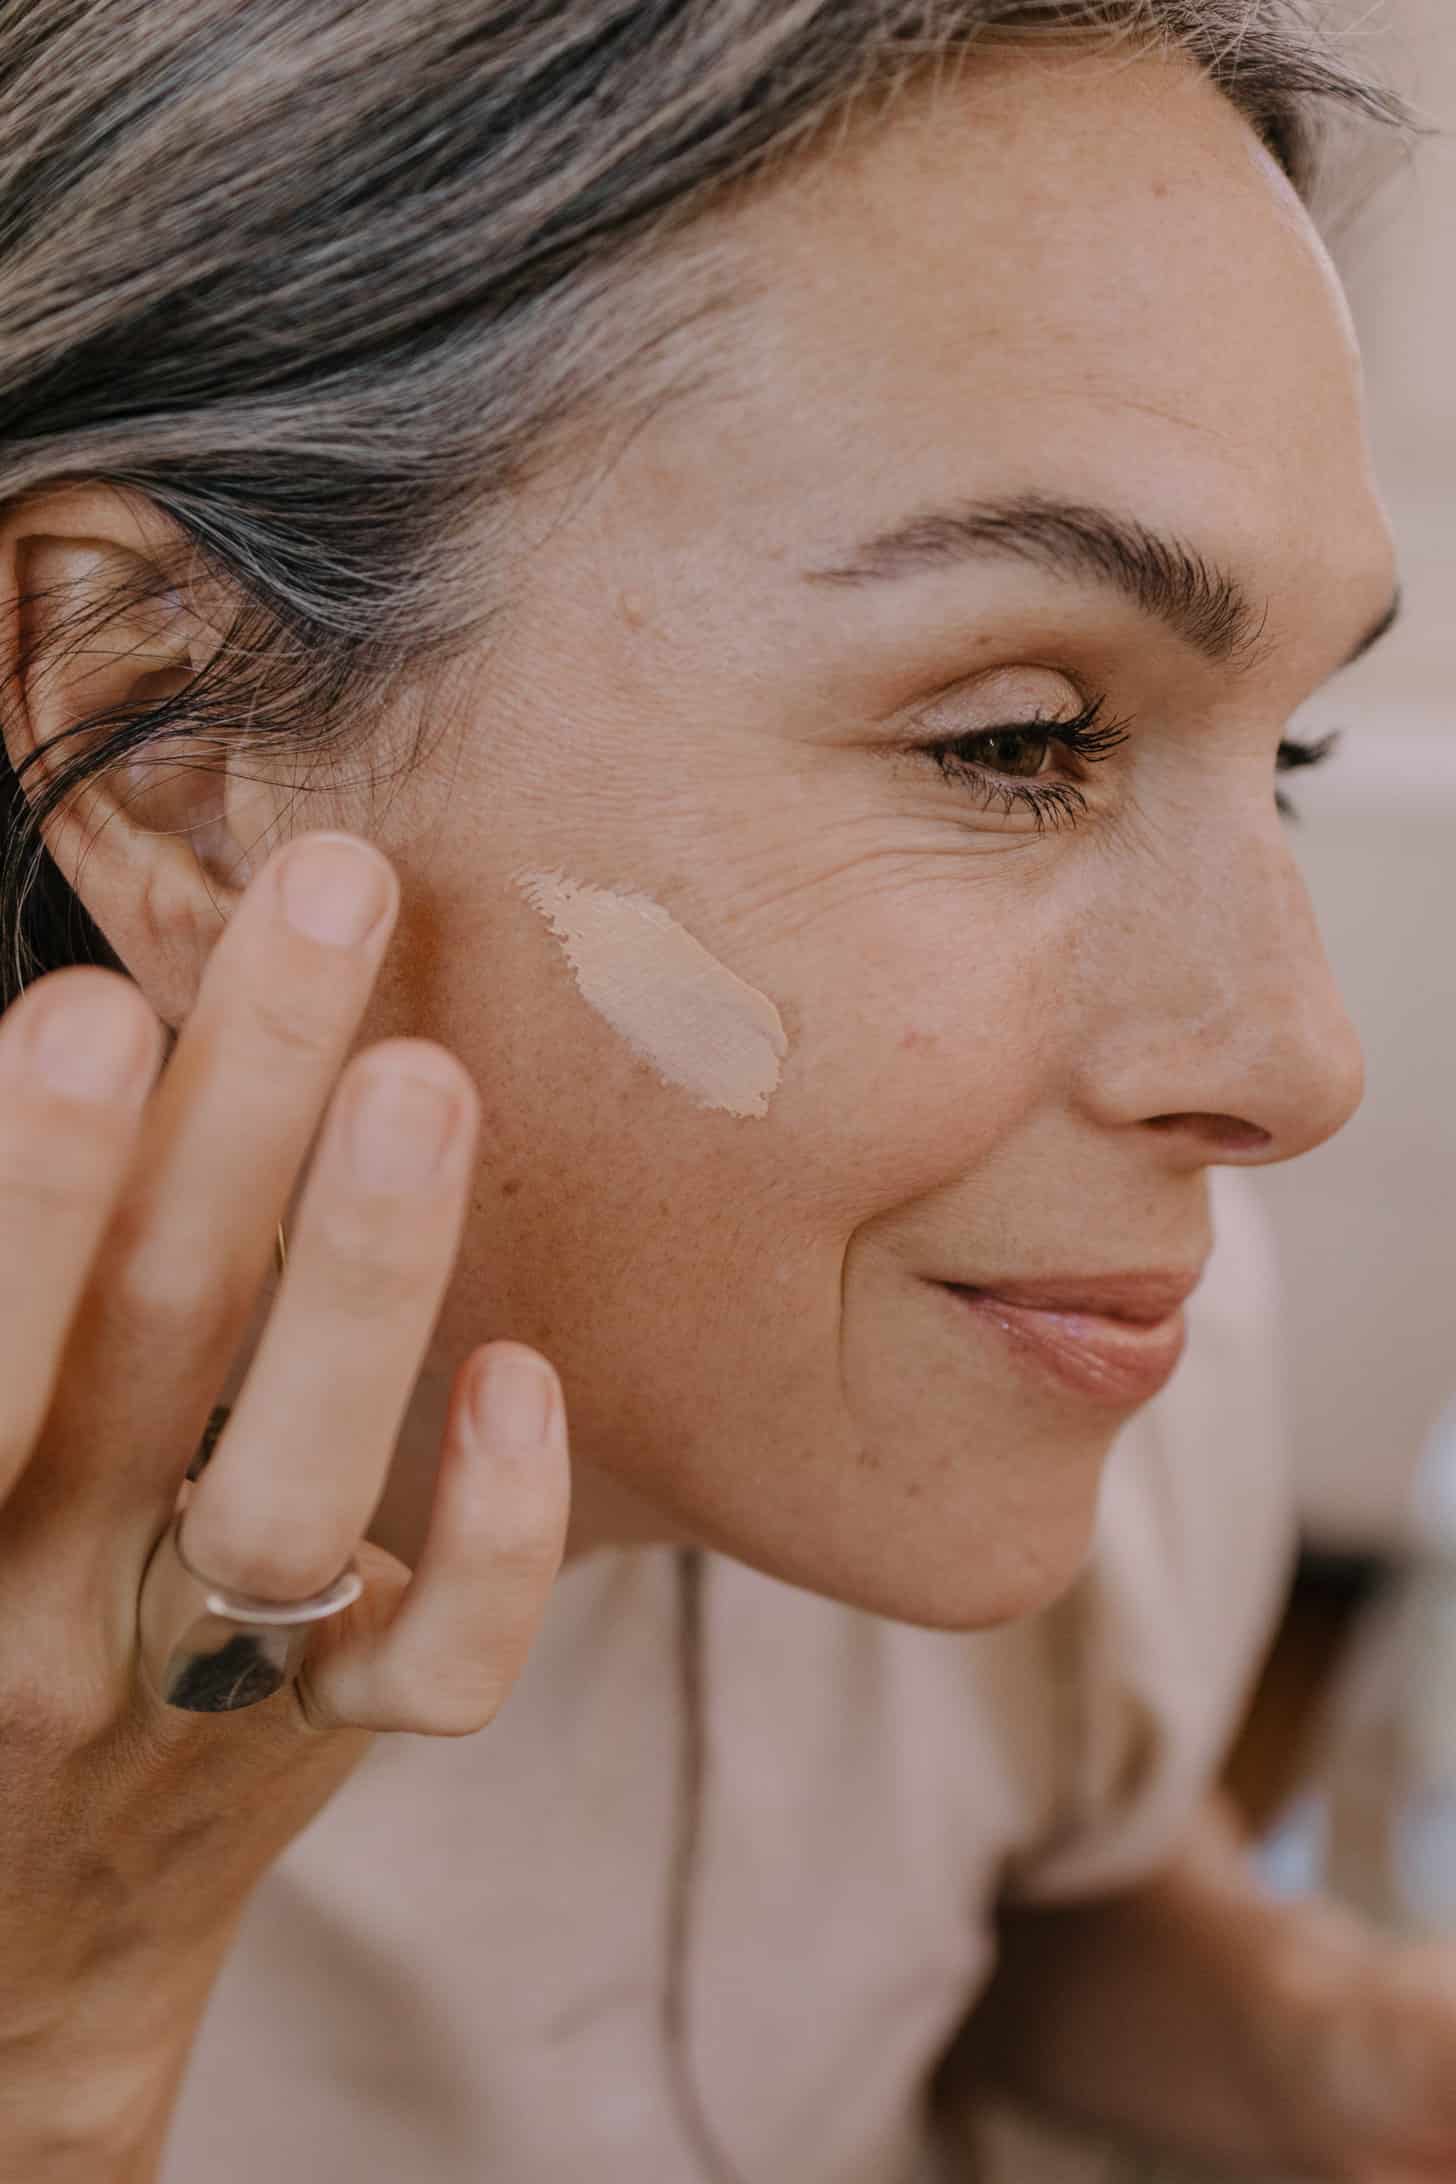 a woman wipes non-toxic tinted face spf on her cheek while smiling